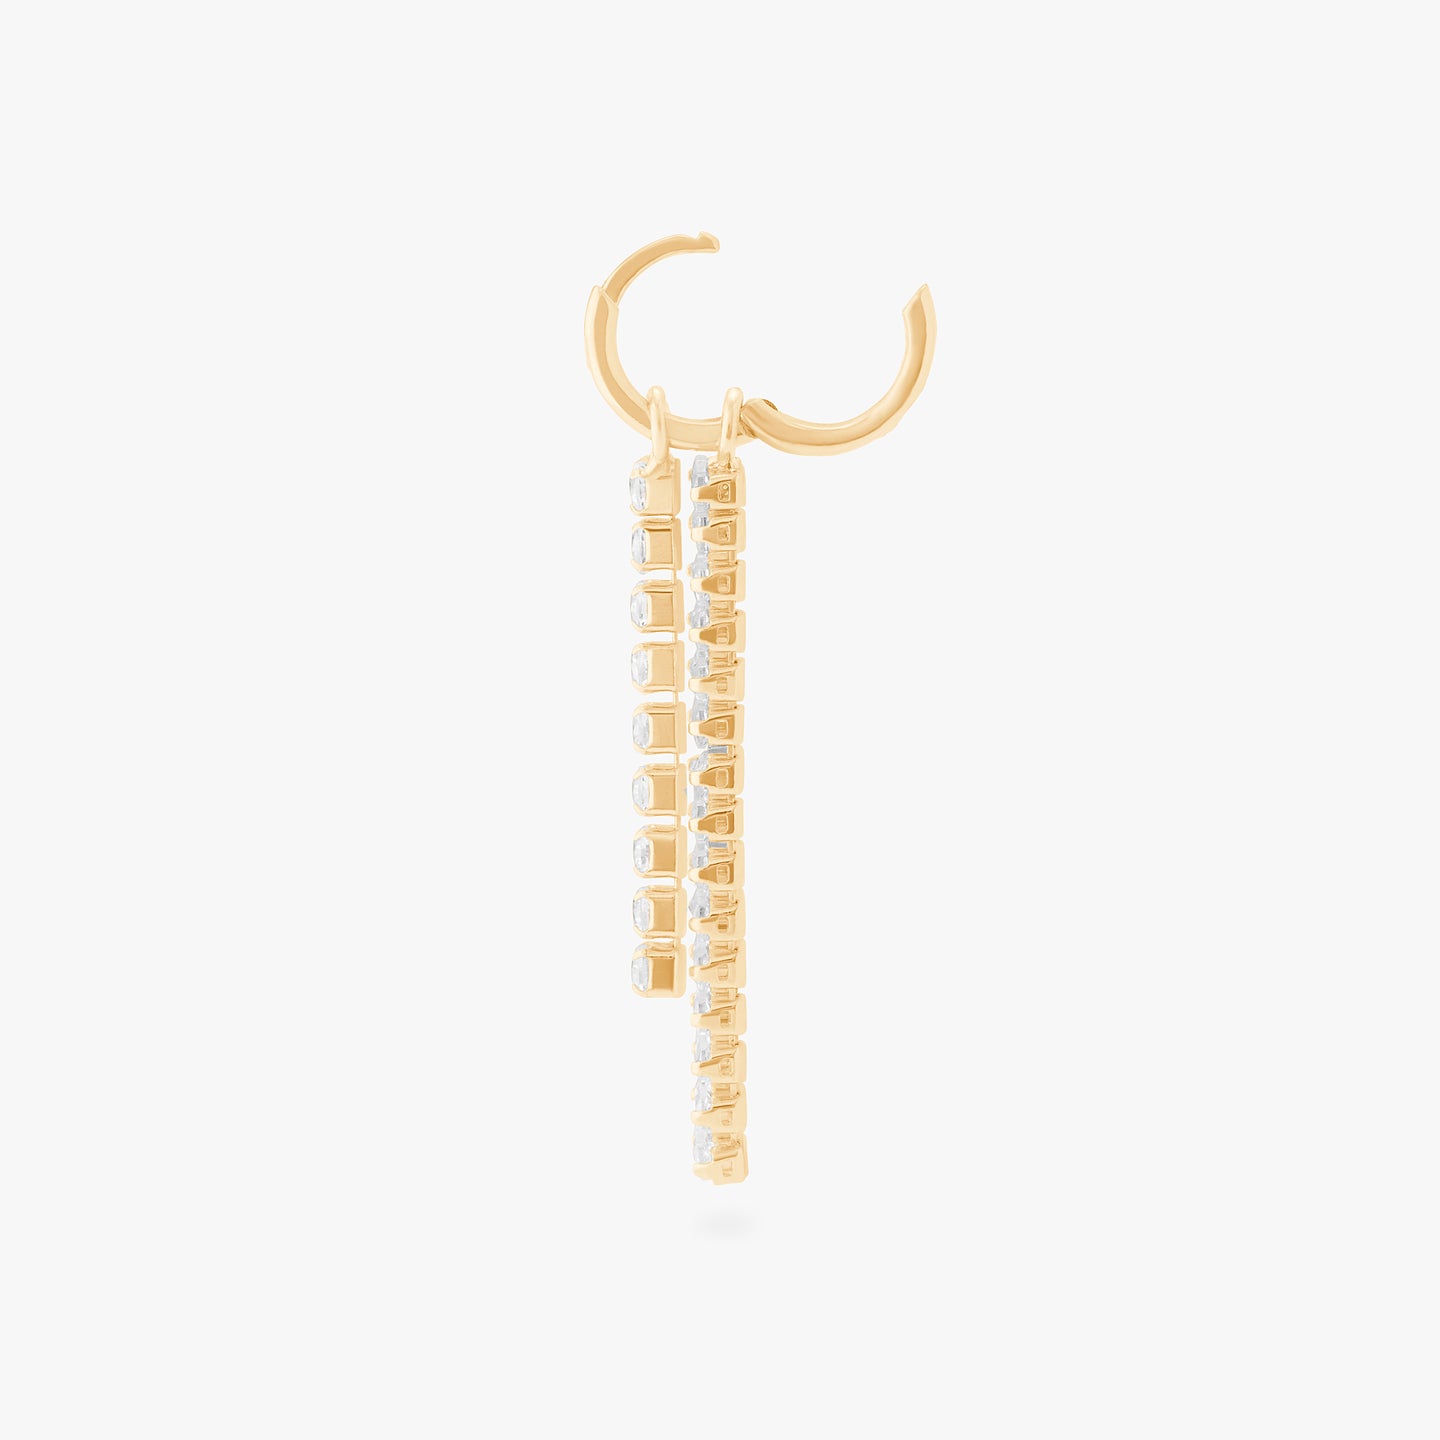 This is an image of a gold small slim huggie with a charm that consists of a string of gold/clear CZs, and a charm that consists of gold/clear baguette CZs unhinged. color:null|gold/clear